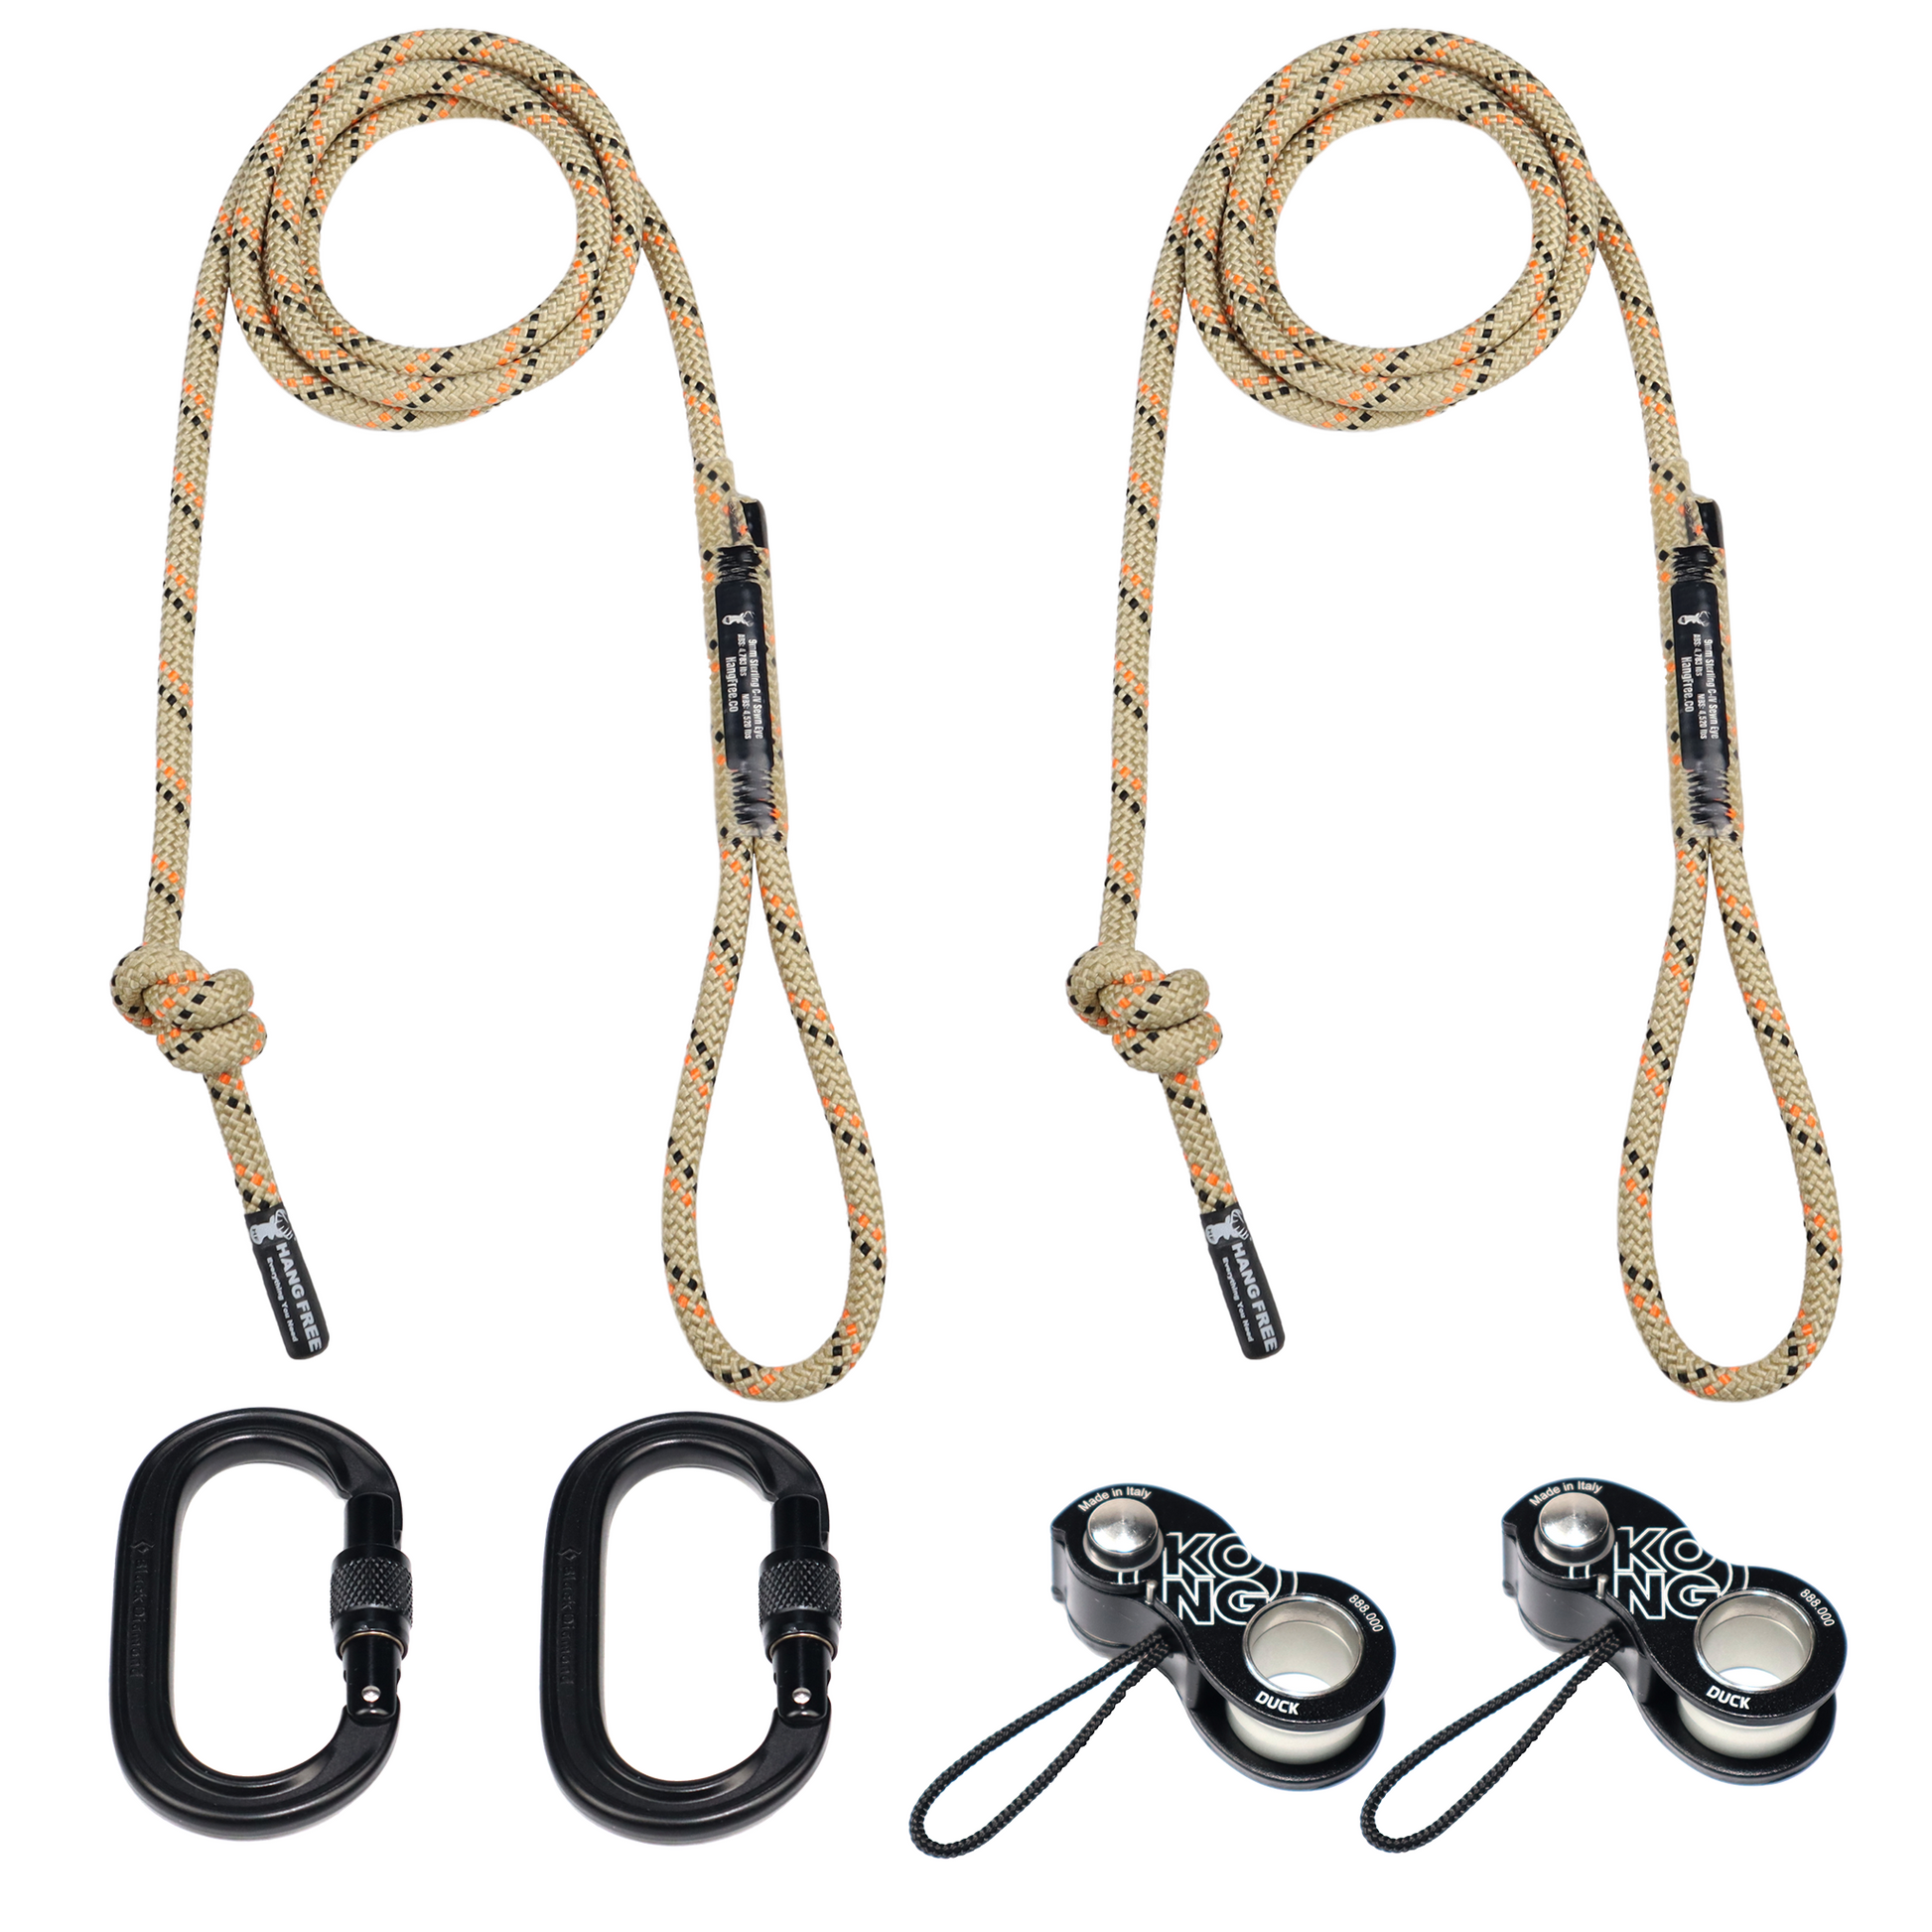 9mm Orange C-IV Deluxe Sewn Tether & Lineman's Package with Carabiners